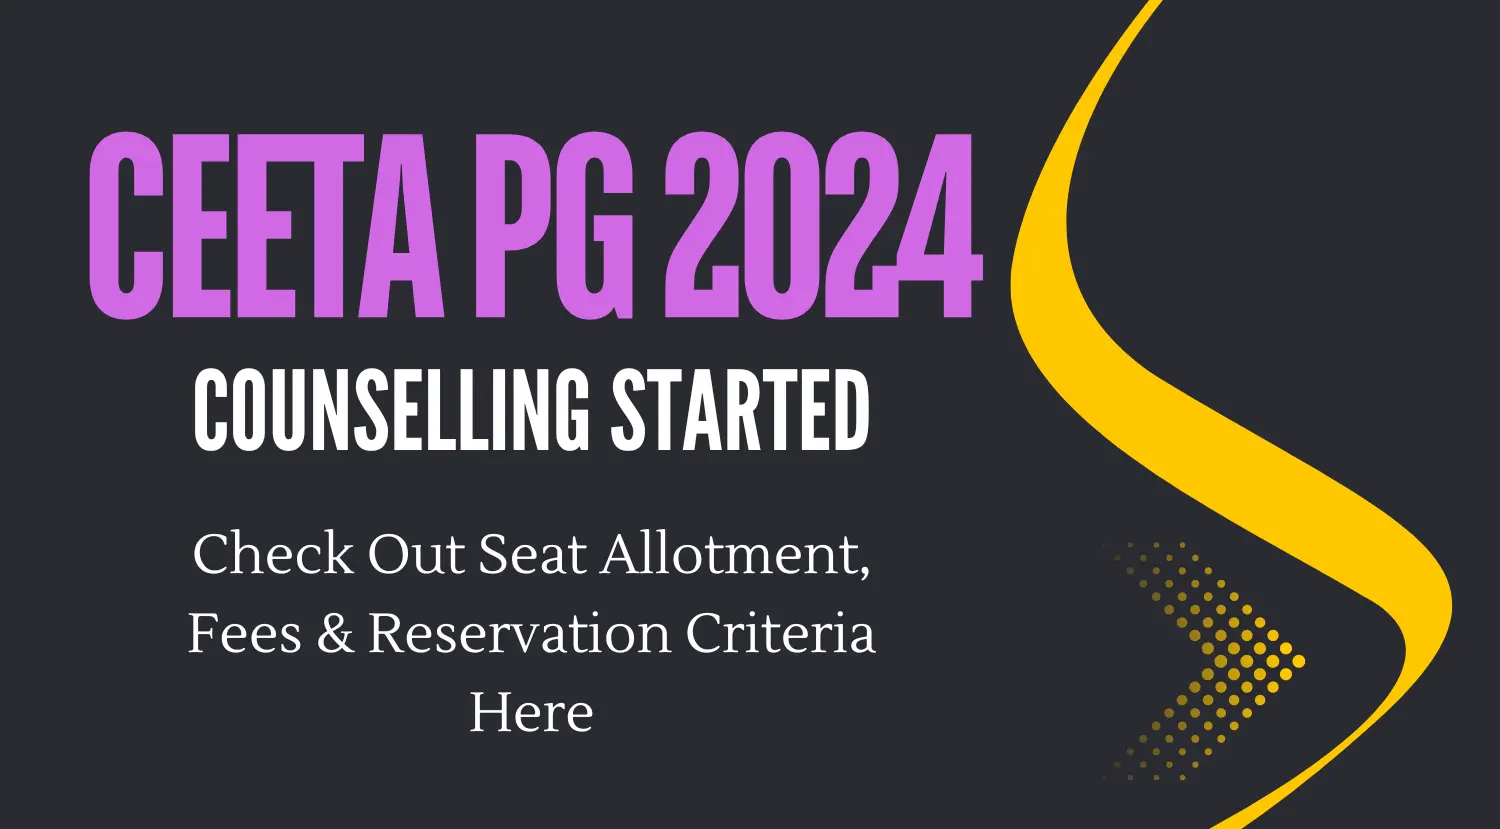 CEETA PG 2024 Counselling Started - Check Out Seat Allotment Fees Reservation Criteria Here